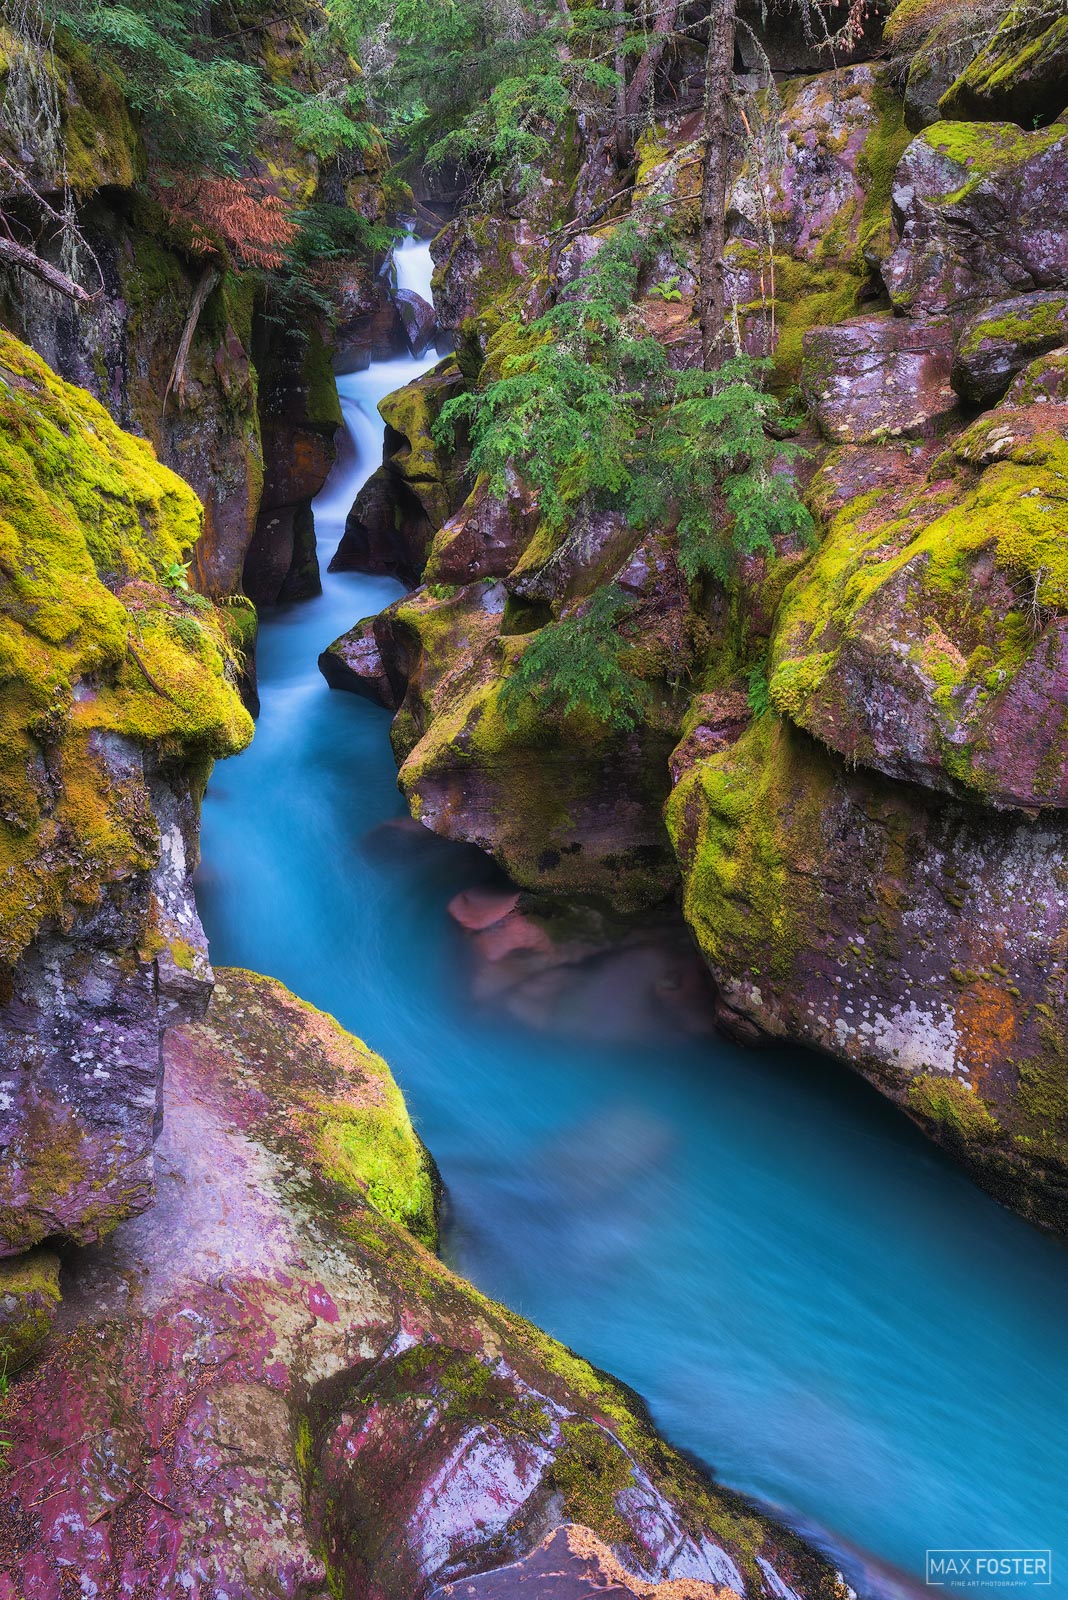 Bring nature into your home with Cerulean Serenade, Max Foster's limited edition photography print of Avalanche Creek in Glacier...